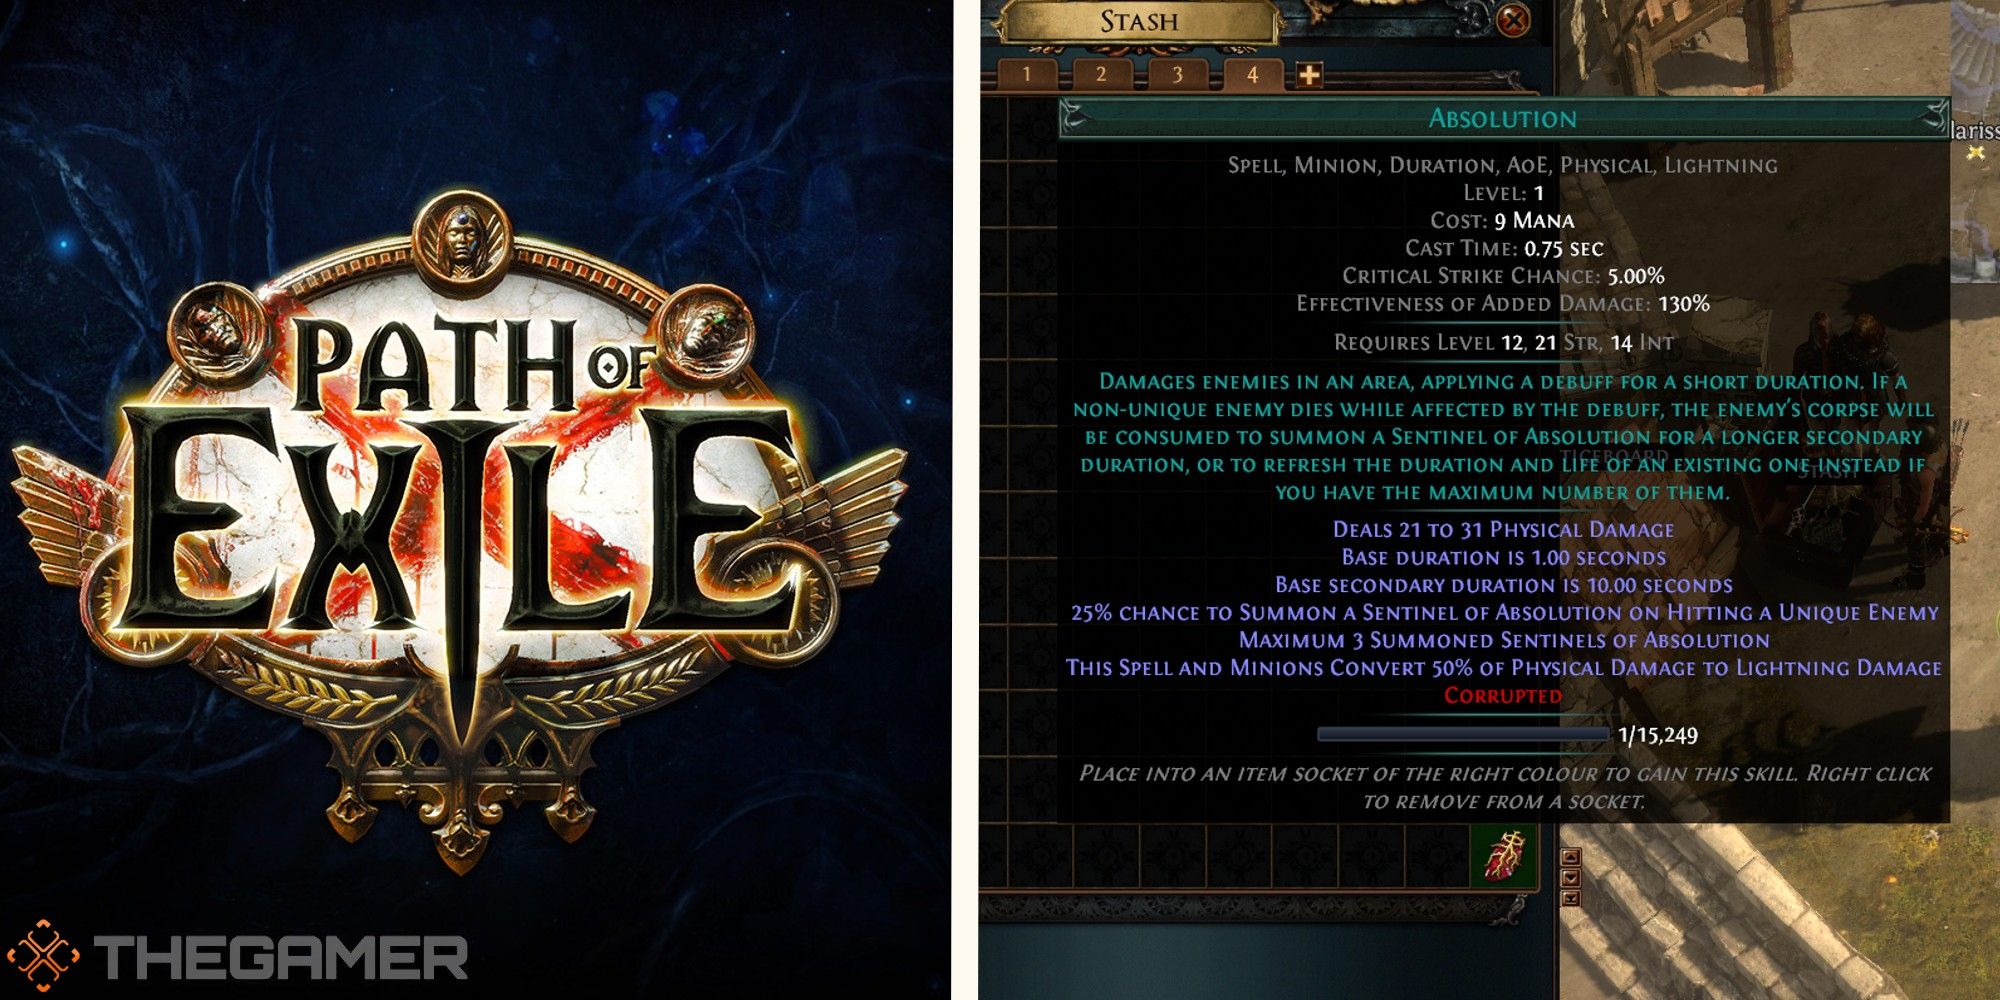 path of exile logo next to image of corrupted gem